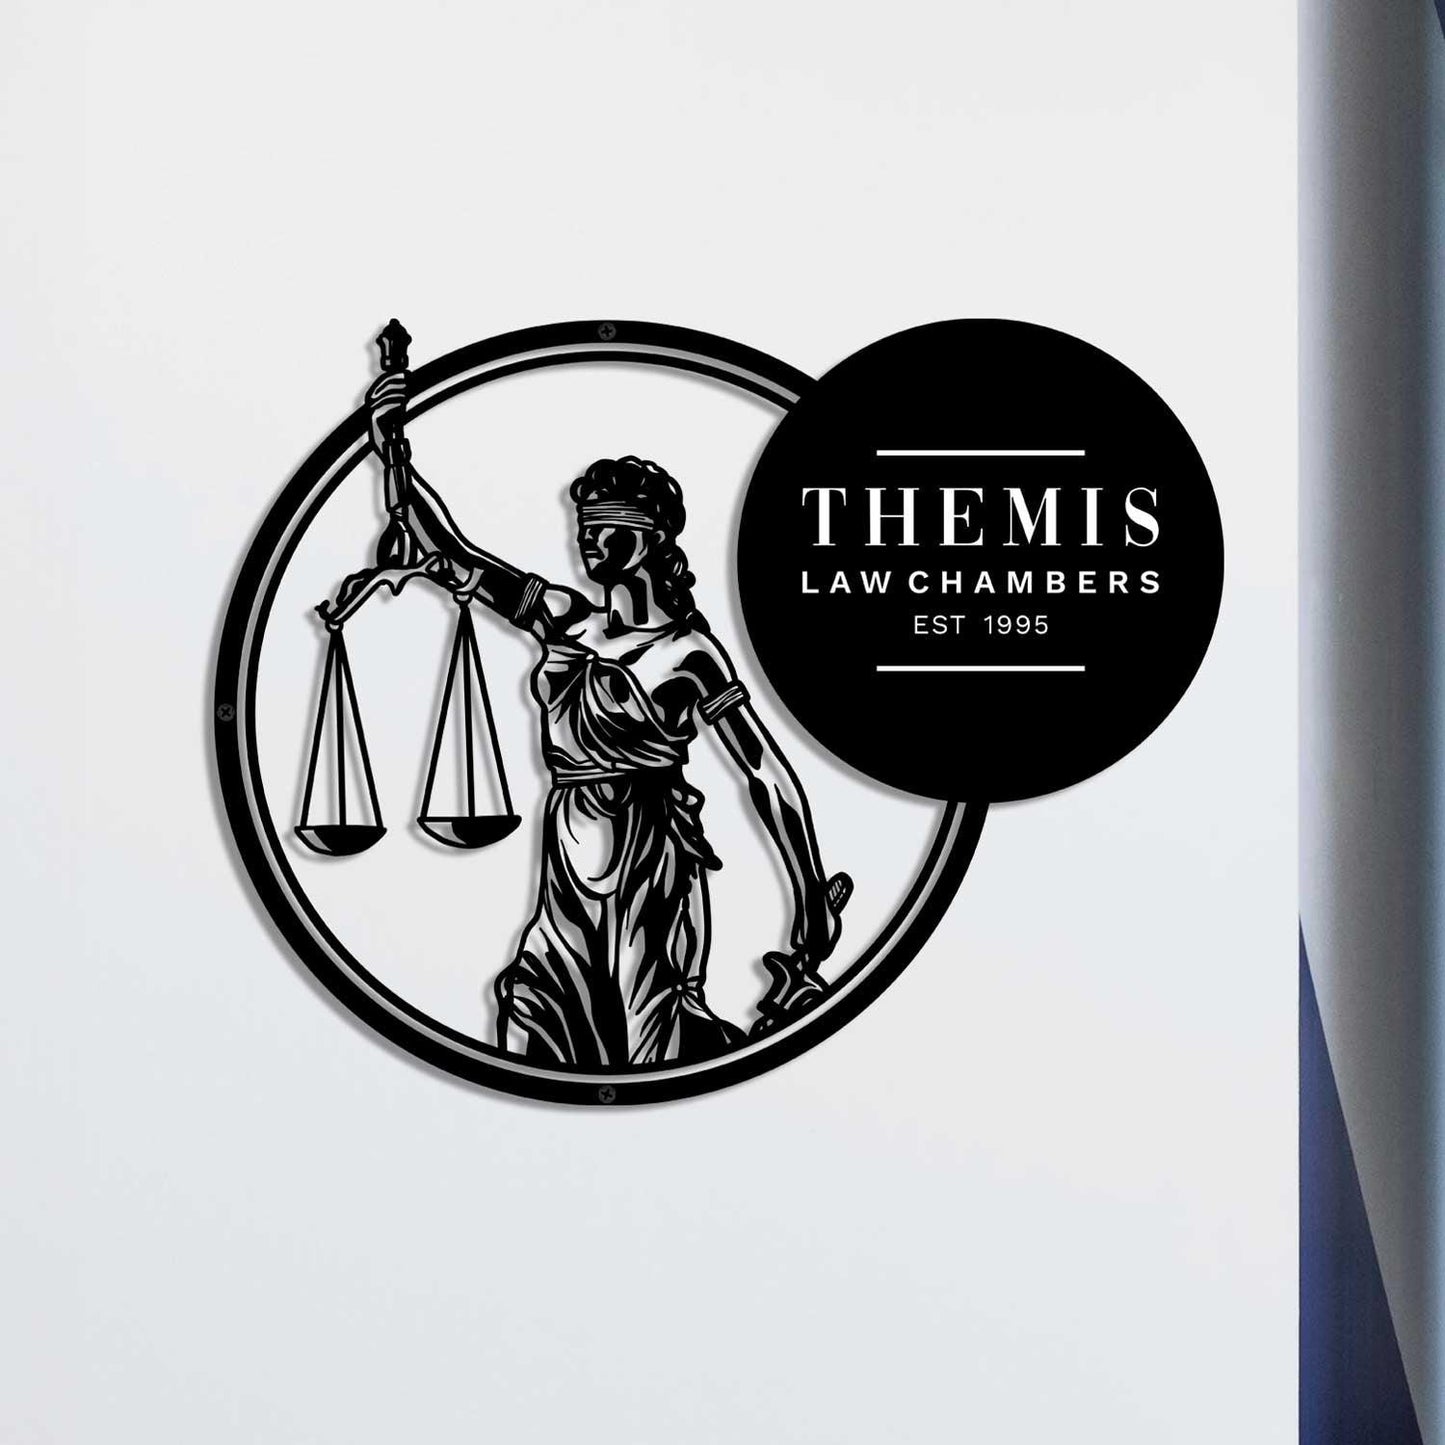 Lady Justice - Personalized Metal Name Plate for Law Firm Offices - Housenama